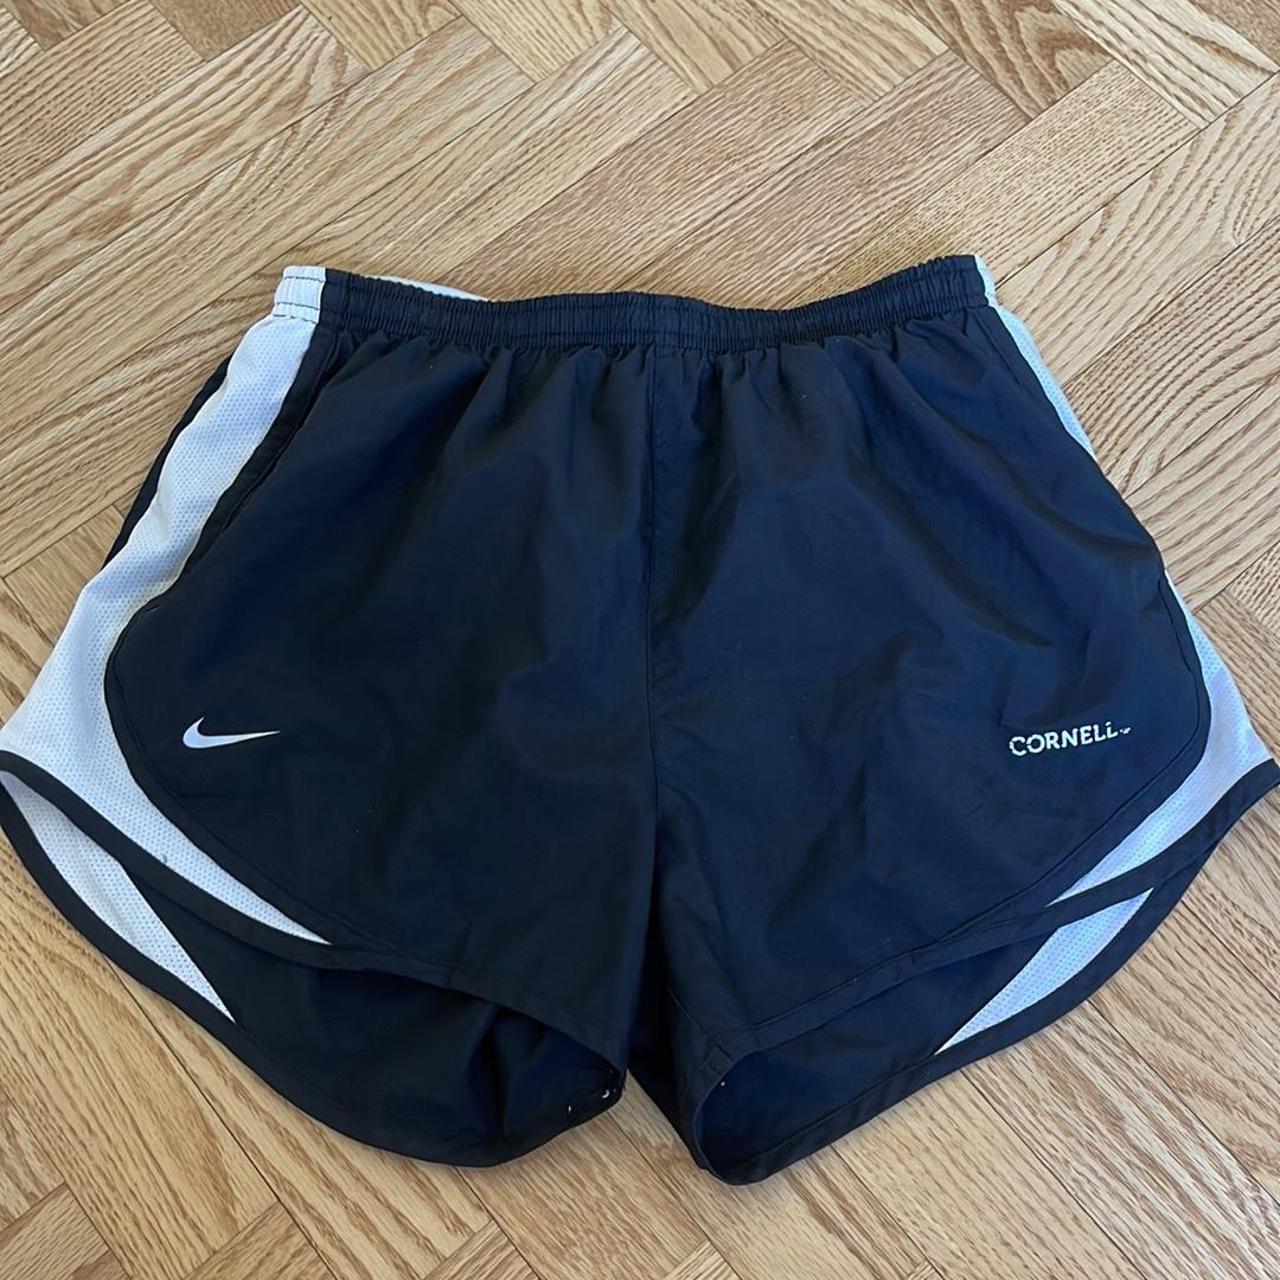 Nike athletic shorts with Cornell logo. In excellent... - Depop